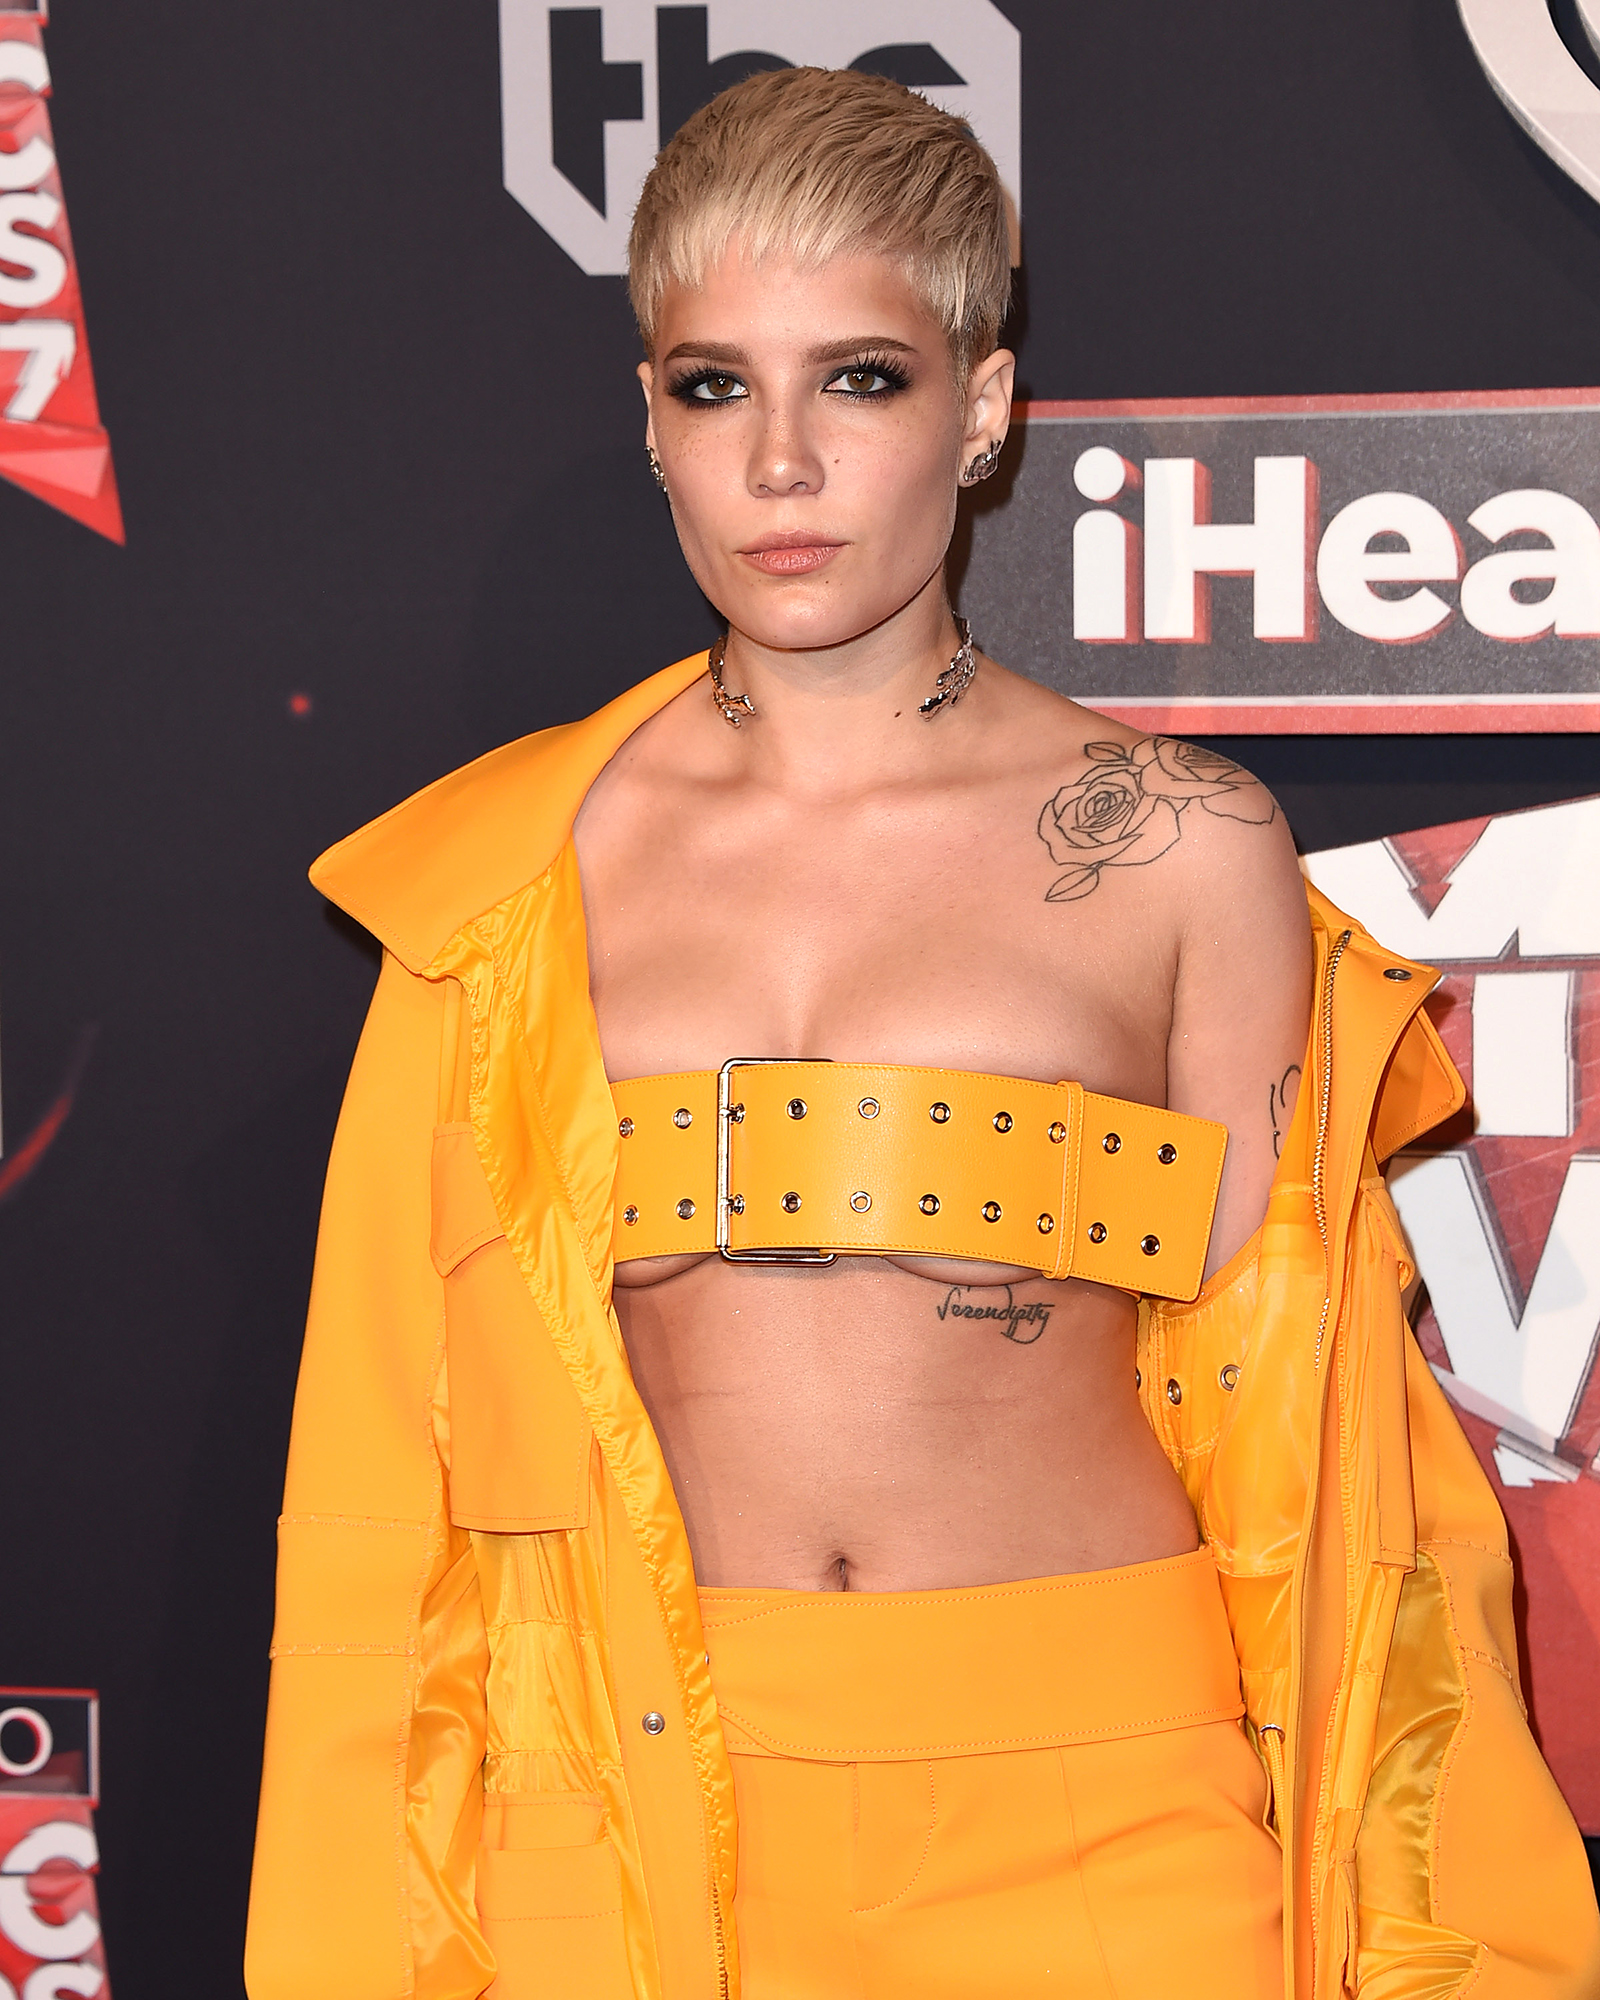 Halsey Braless: Photos of the Singer Not Wearing a Bra